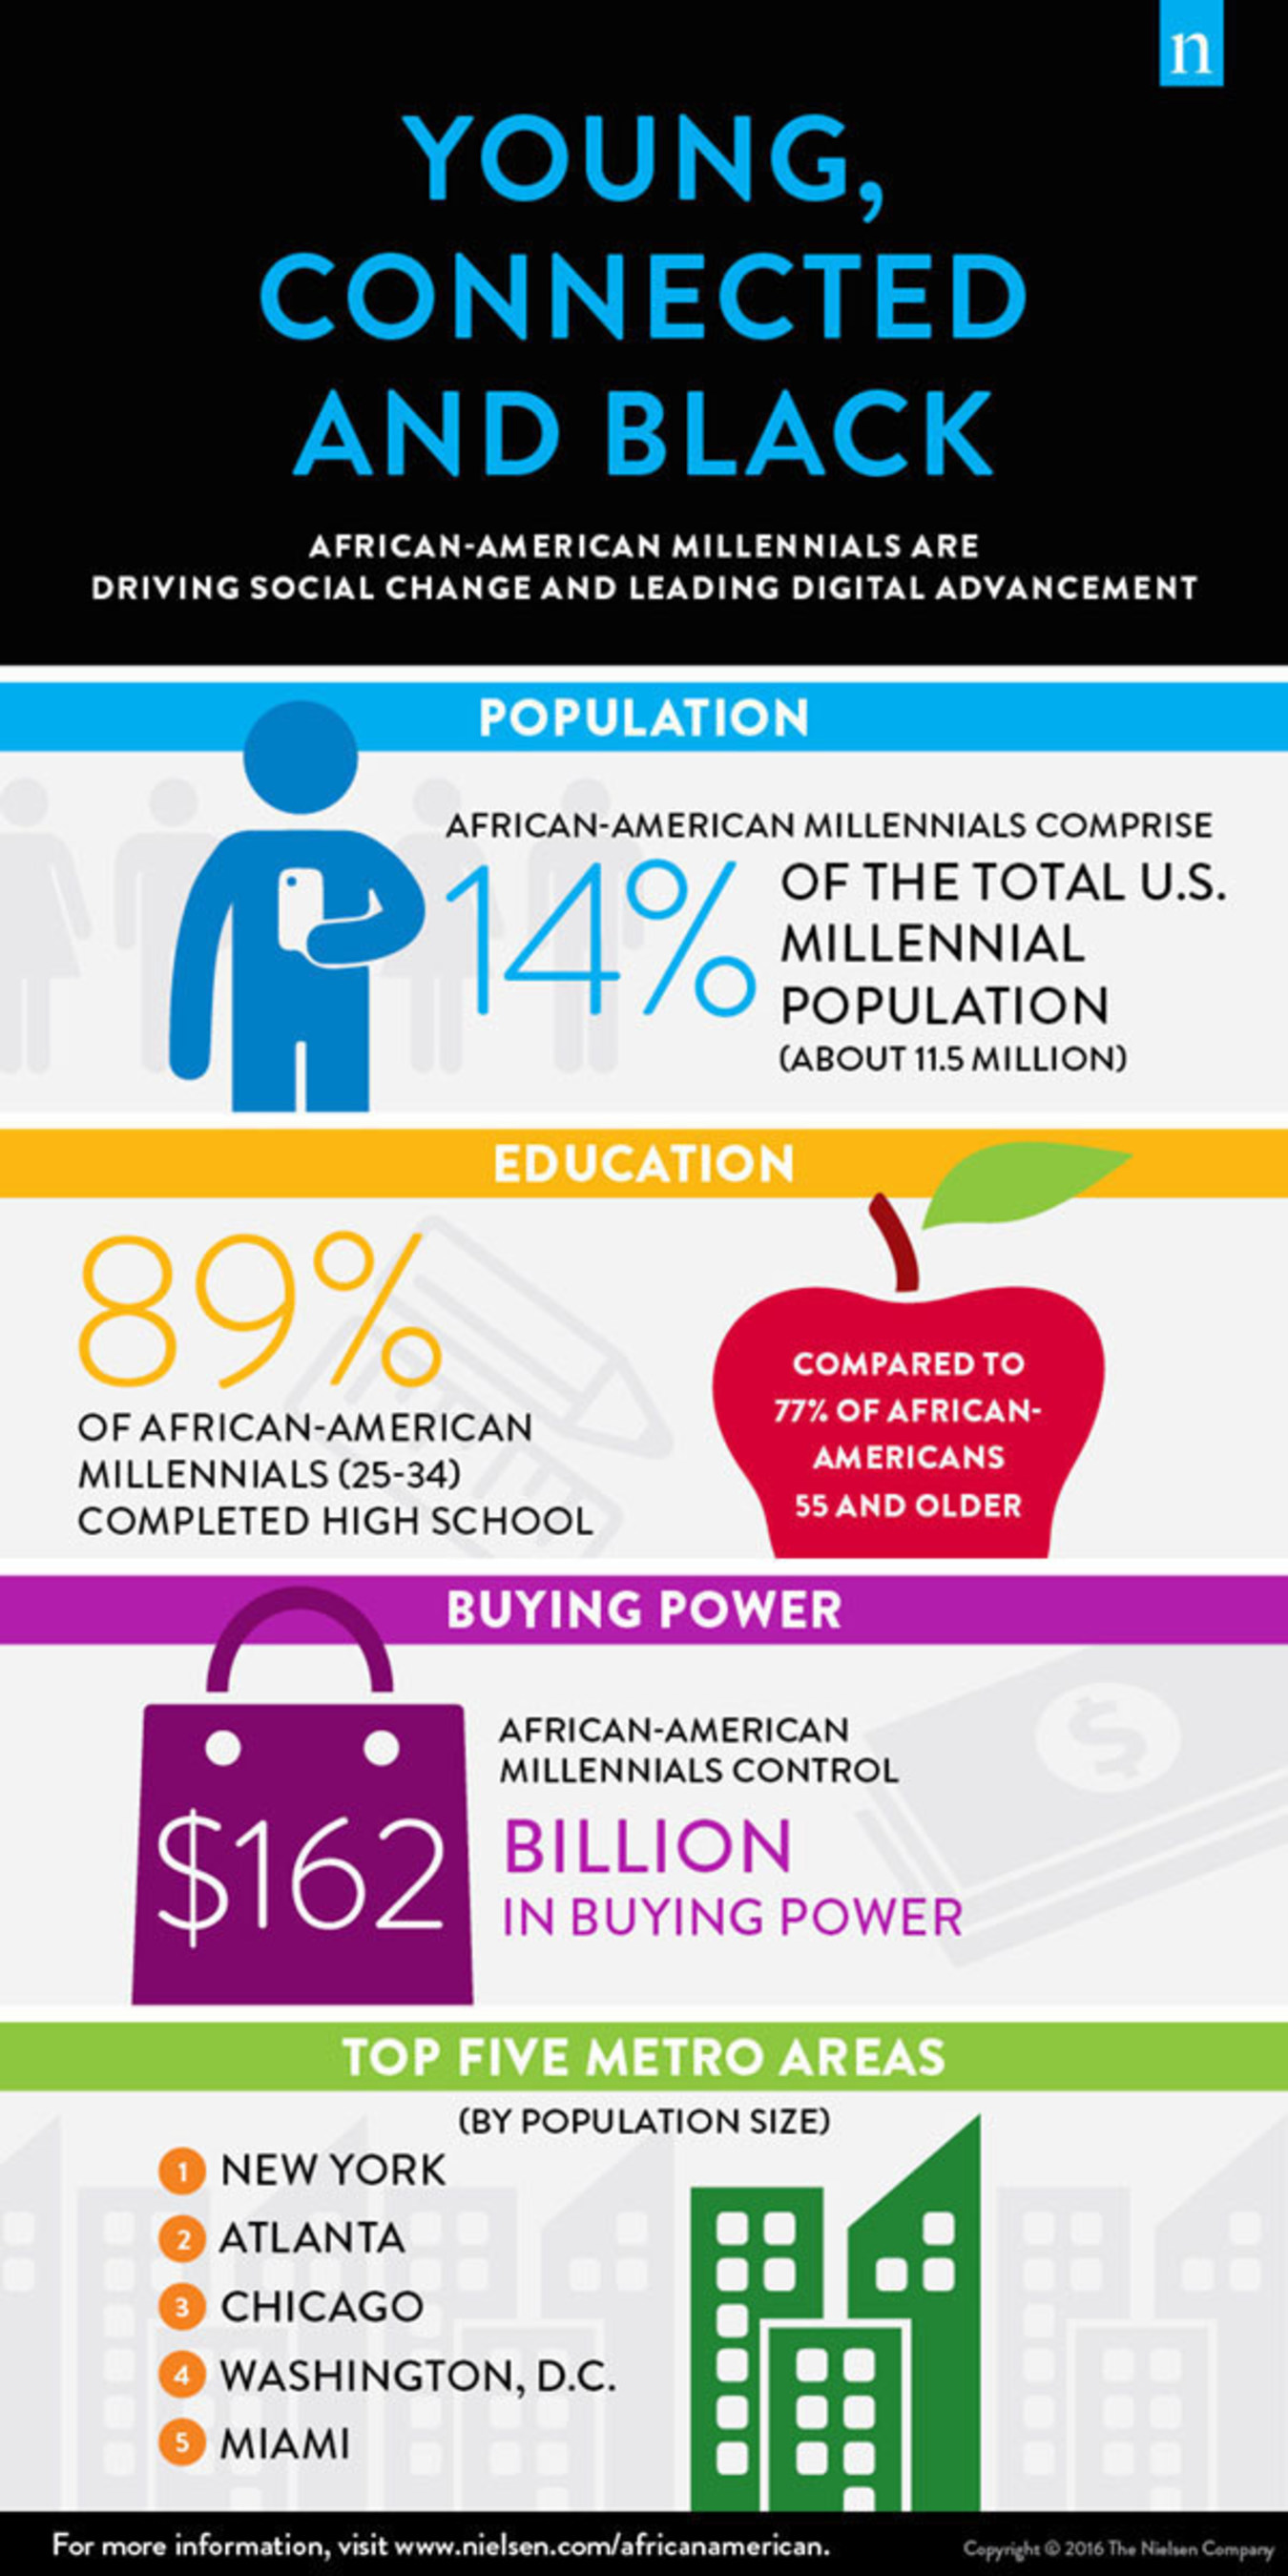 Nielsen released its sixth annual report on Black consumers. The 2016 report focuses on the nation's 11.5 million African-American Millennials--their shopping and viewing habits, social media and digital trends, economic power and cultural influence. For more details and insights, download the 2016 report, "Young, Connected and Black: African-American Millennials Are Driving Social Change and Leading Digital Advancement" at www.nielsen.com/africanamericans.